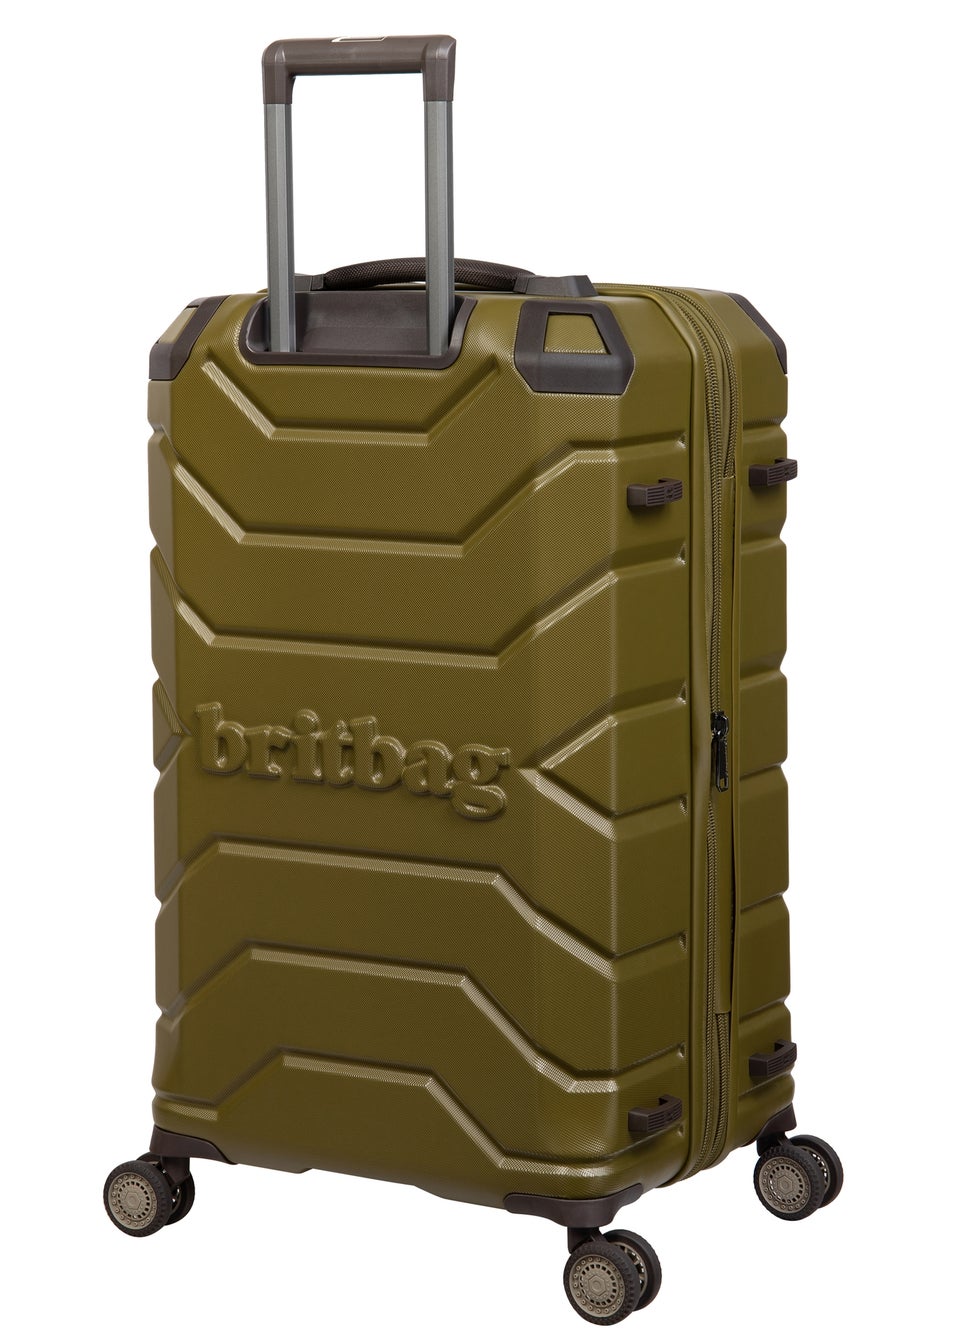 BritBag Galloway Olive Nut Suitcase with TSA Lock